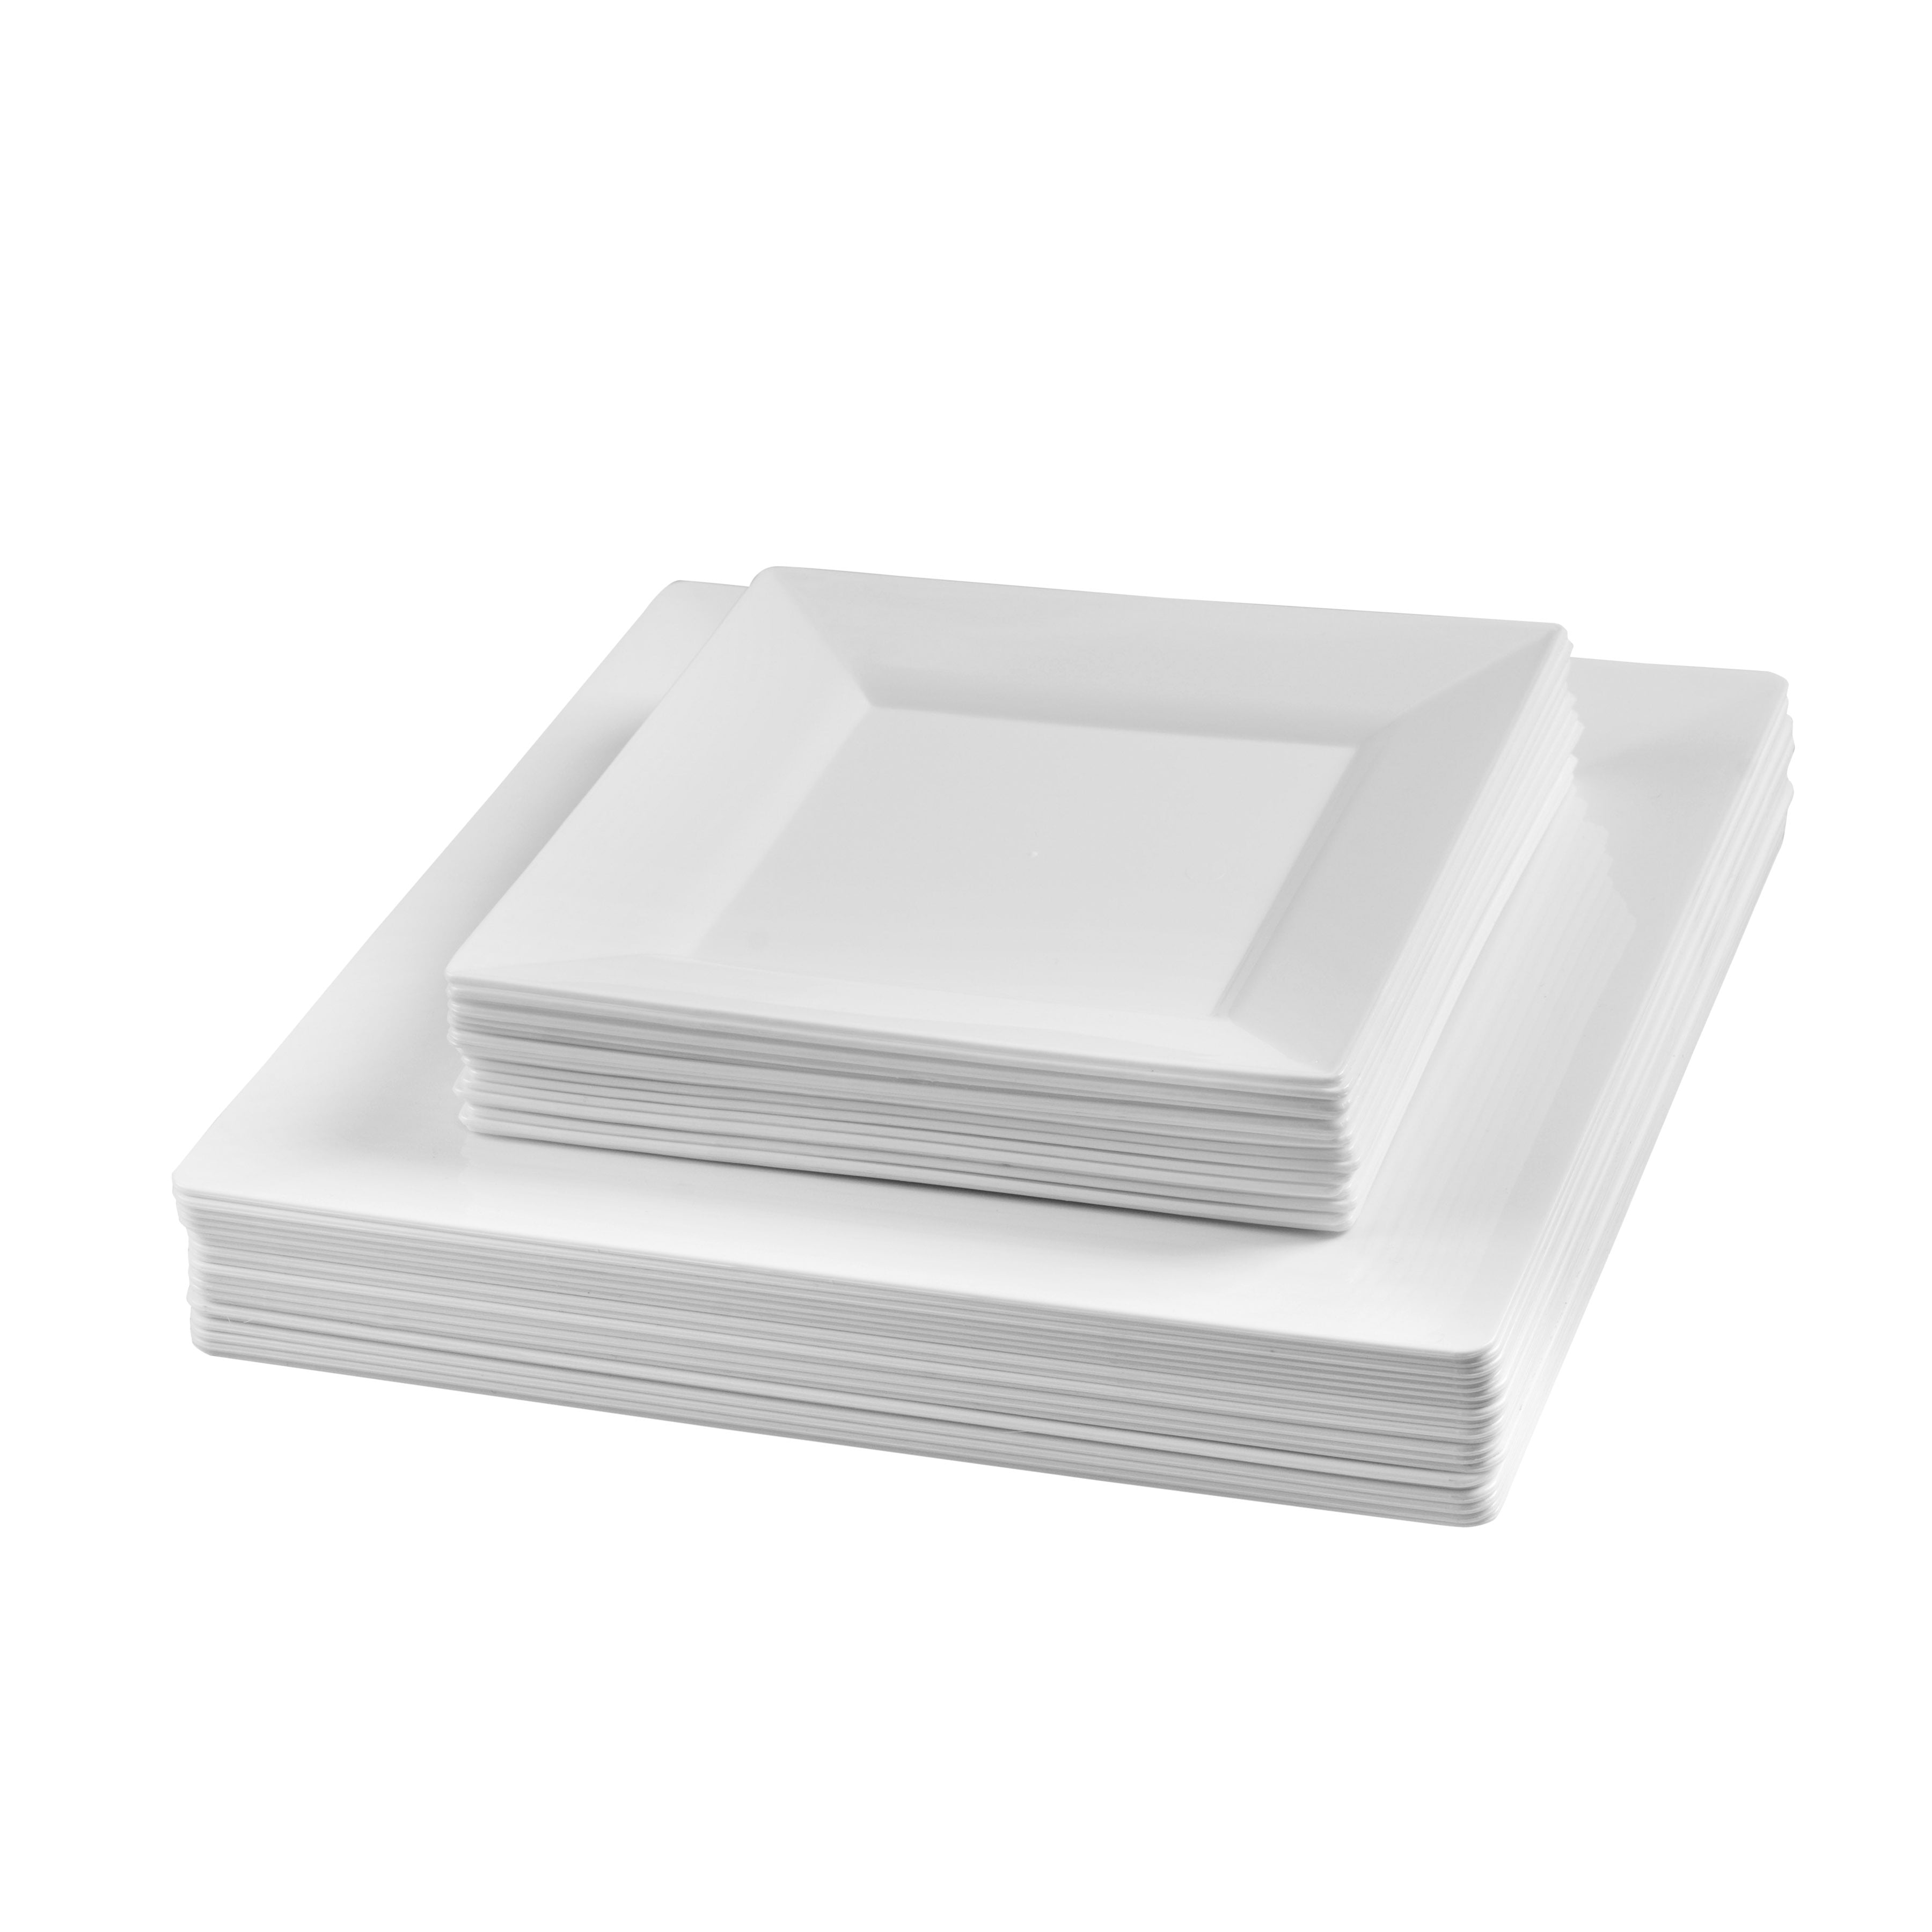 Posh Setting Square Clear Plastic Plates Disposable Wedding Party Plates 60 Pack Includes 20 9.5 Dinner and 20 6.5 Salad Plates 